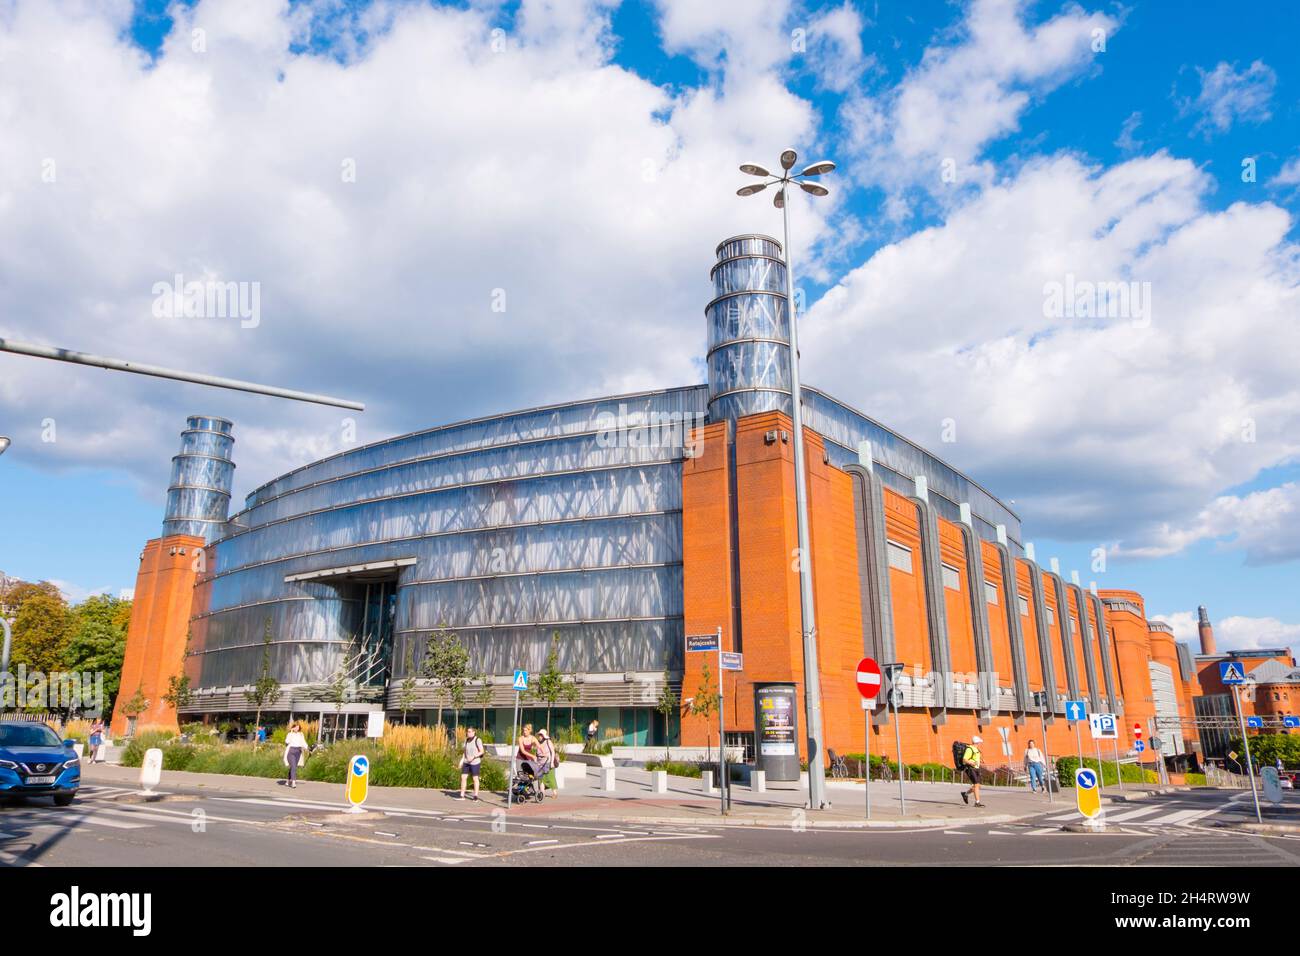 Stary Browar, former brewery turned into a shopping mall, Poznan, Poland Stock Photo